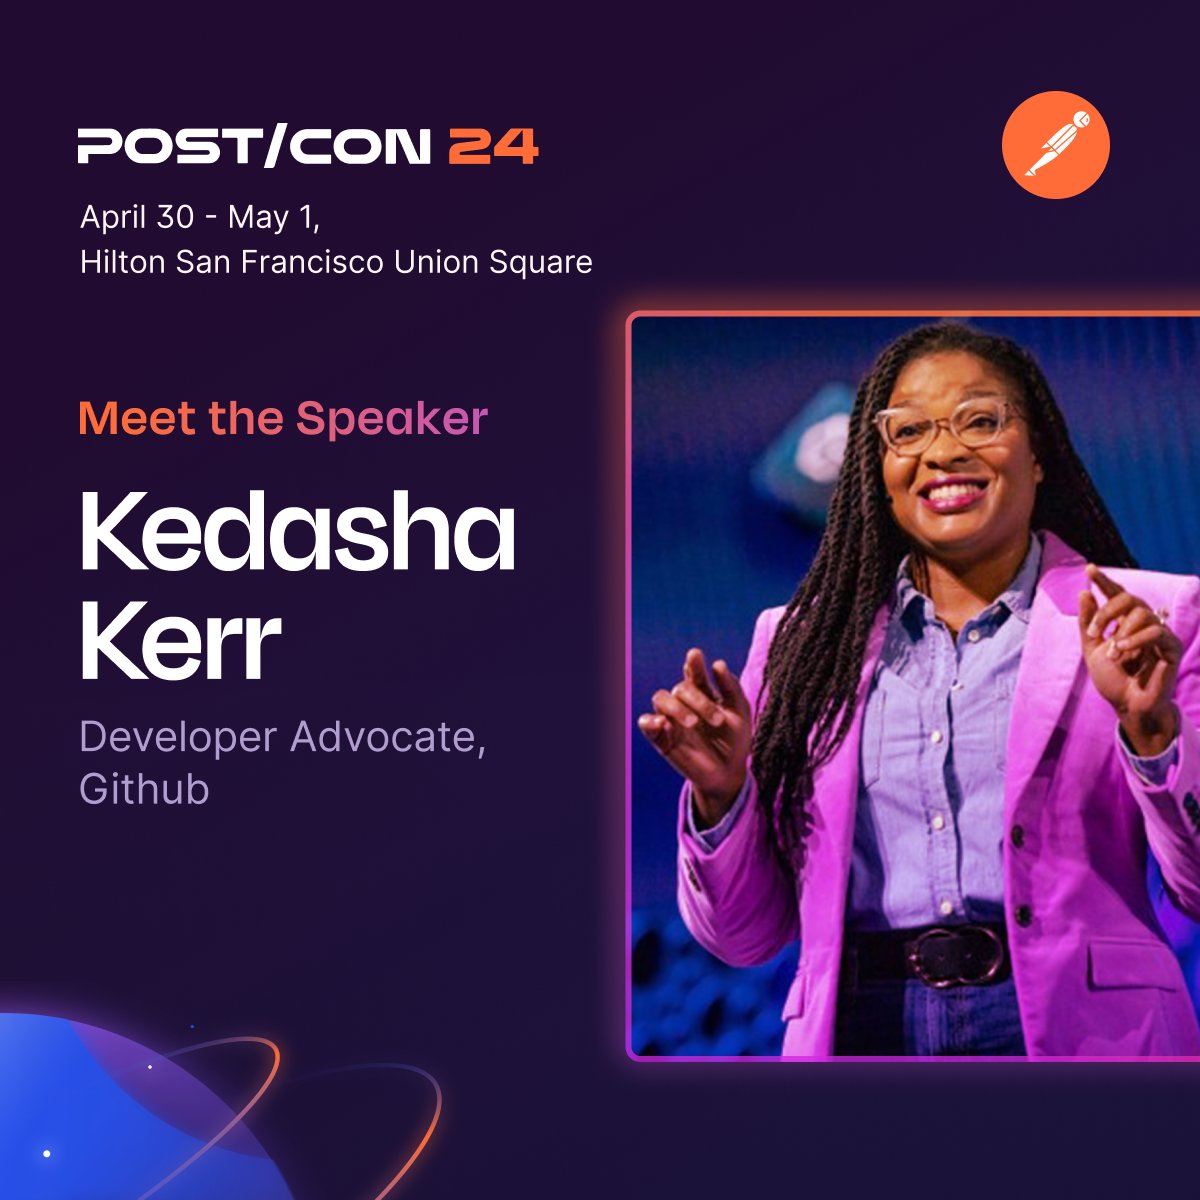 SUUUUUPER excited to head to @getpostman's Postcon conference next week!💃🏼 Will be doing a live demo on building an api with AI (gh-copilot and postbot) and how to make these tools an effective part of your workflow! ✨